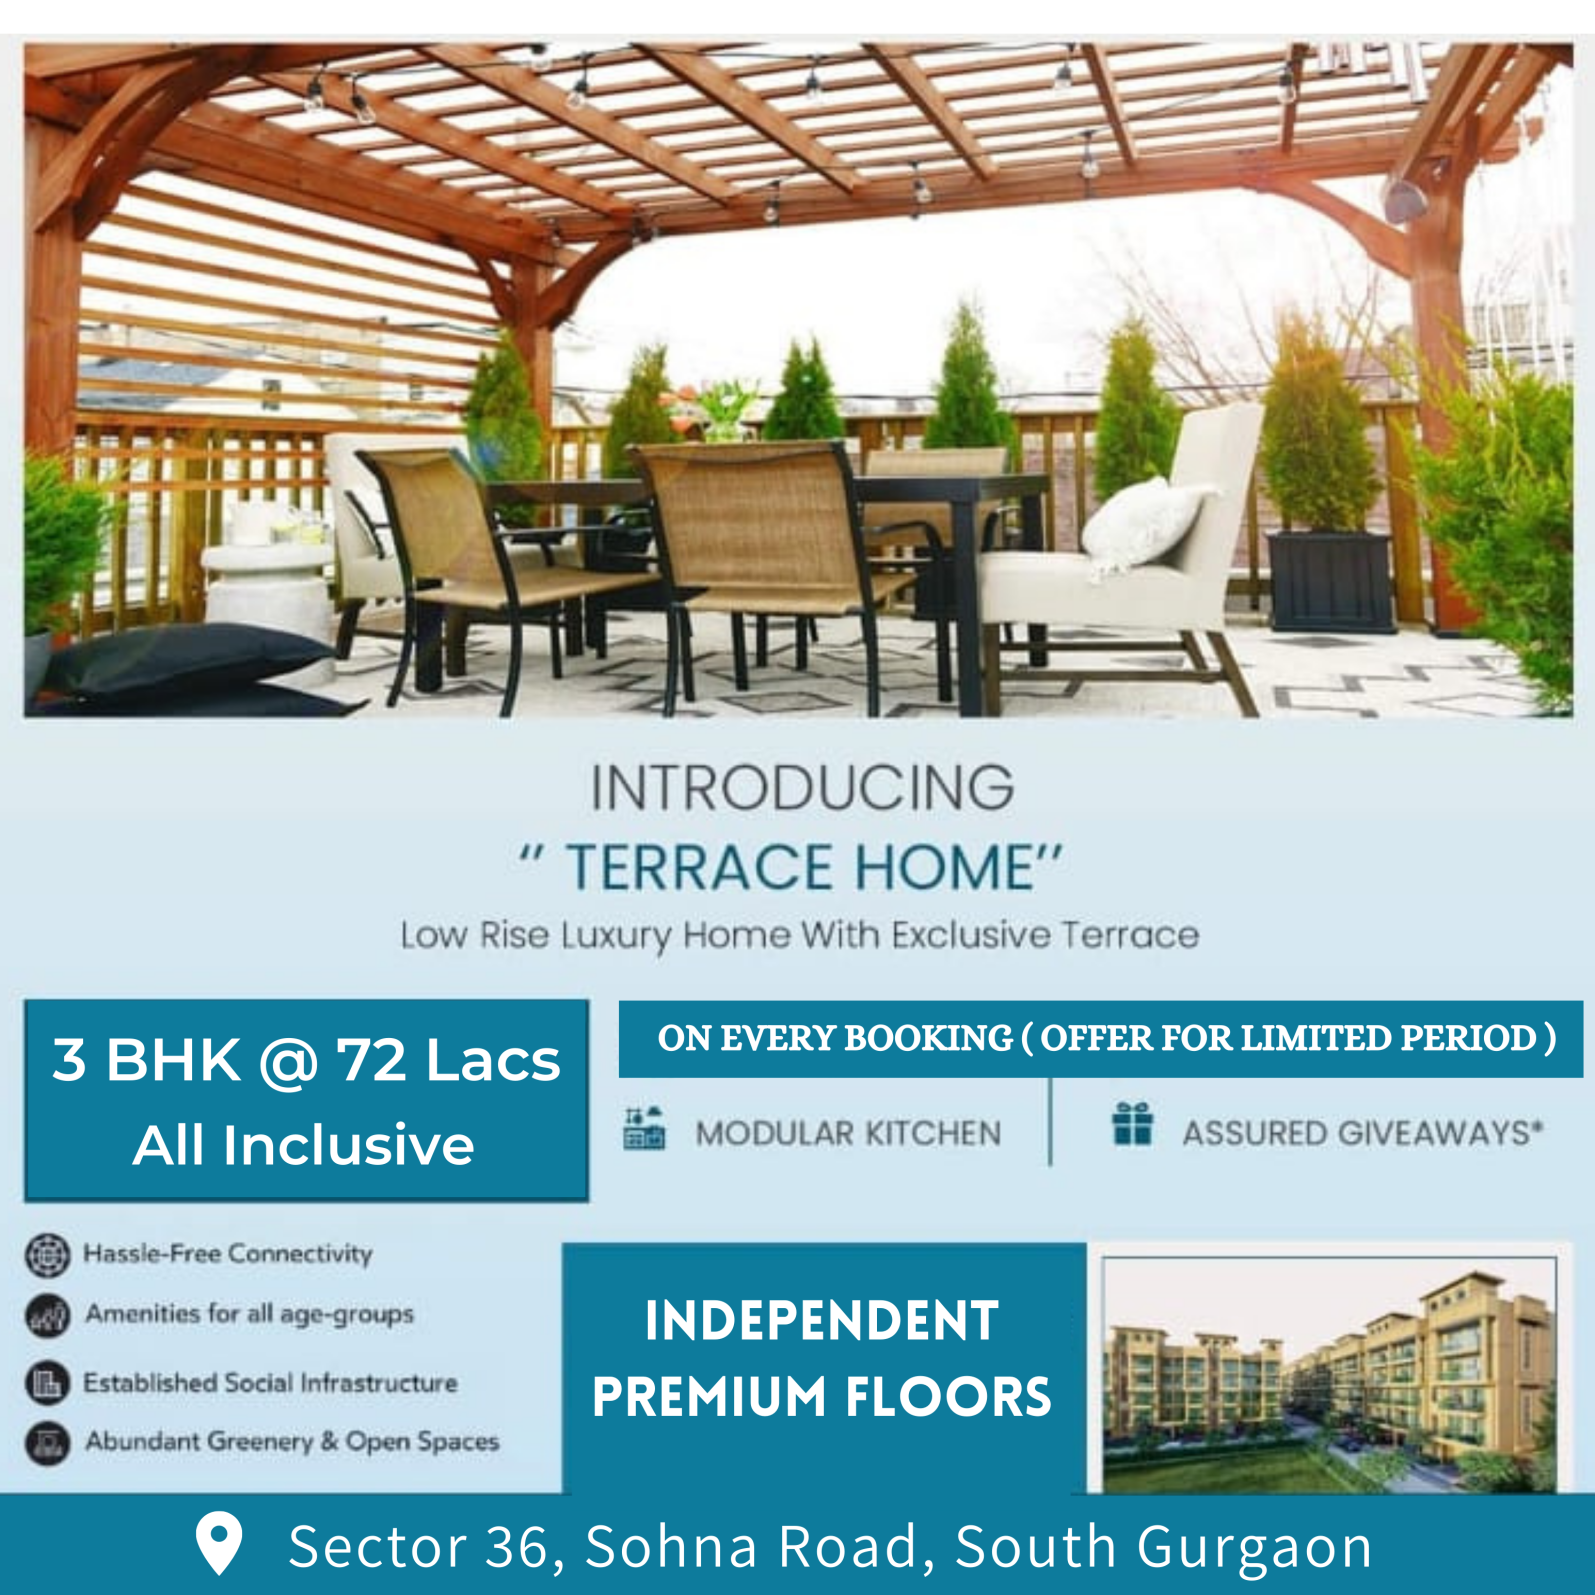 Introducing terrace home low rise luxury home with exclusive terrace at Signature Global Park 4 & 5, Sauth of Gurgaon Update